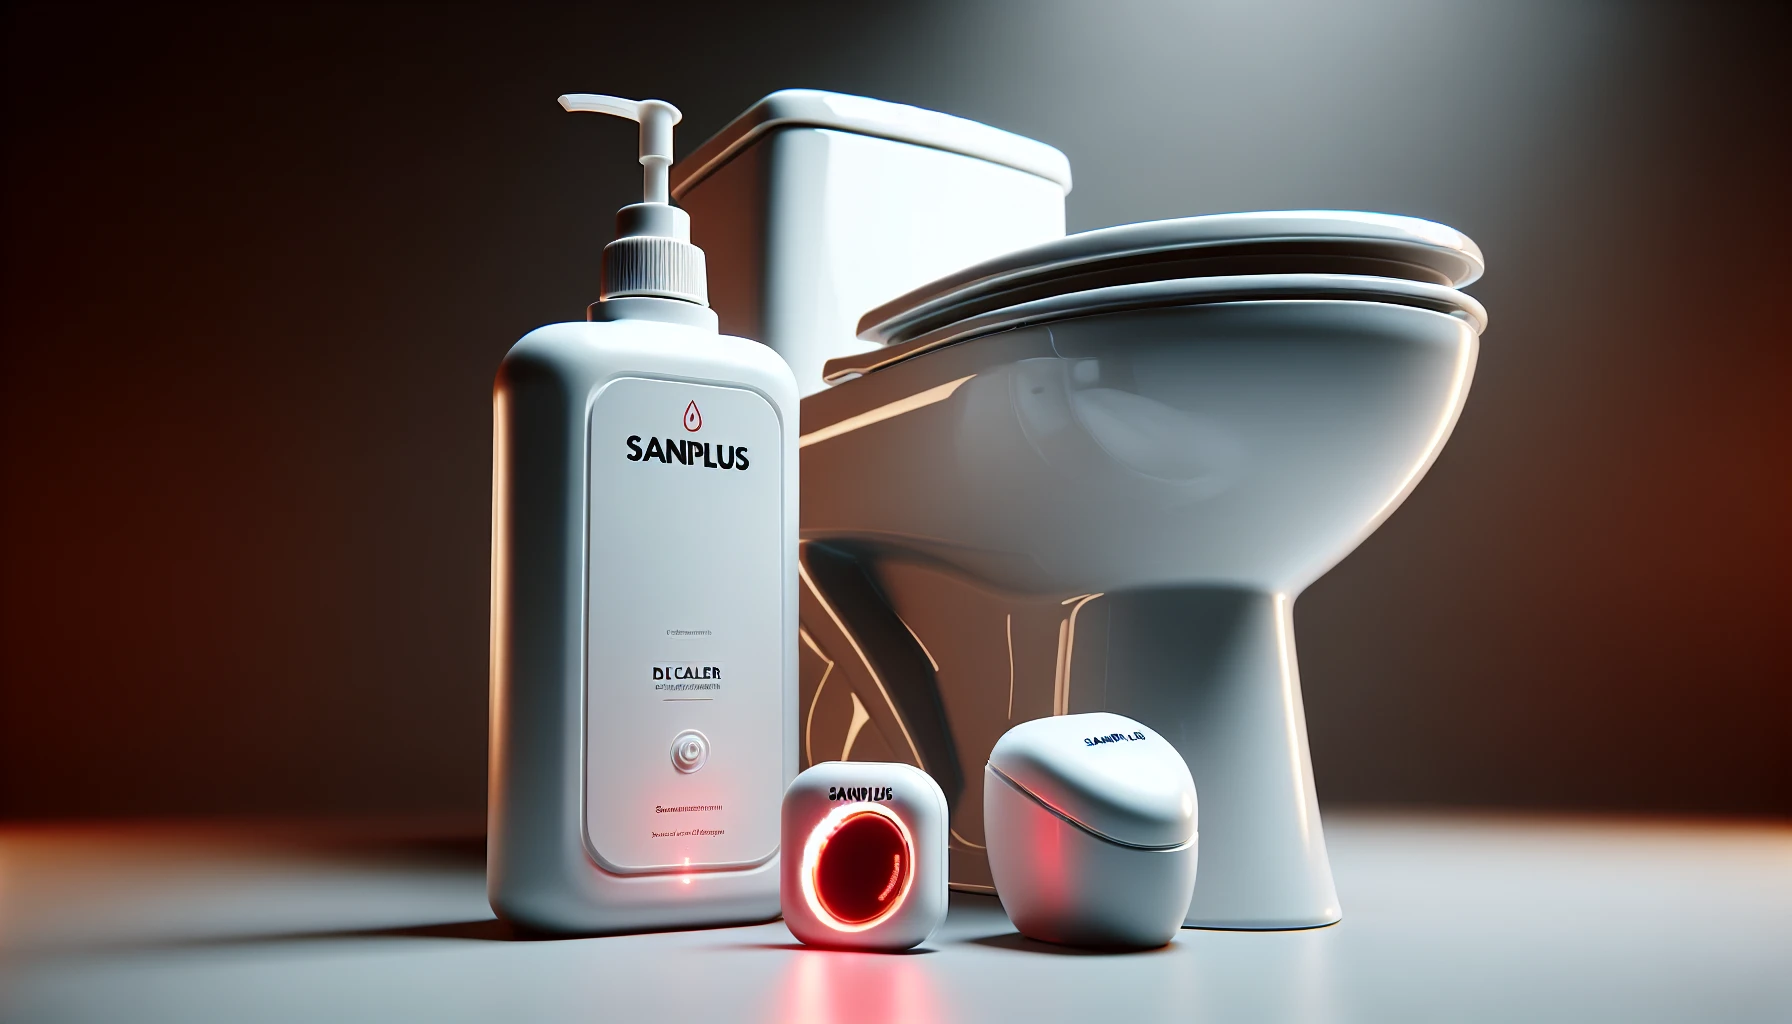 Saniplus toilet system accessories for optimal performance